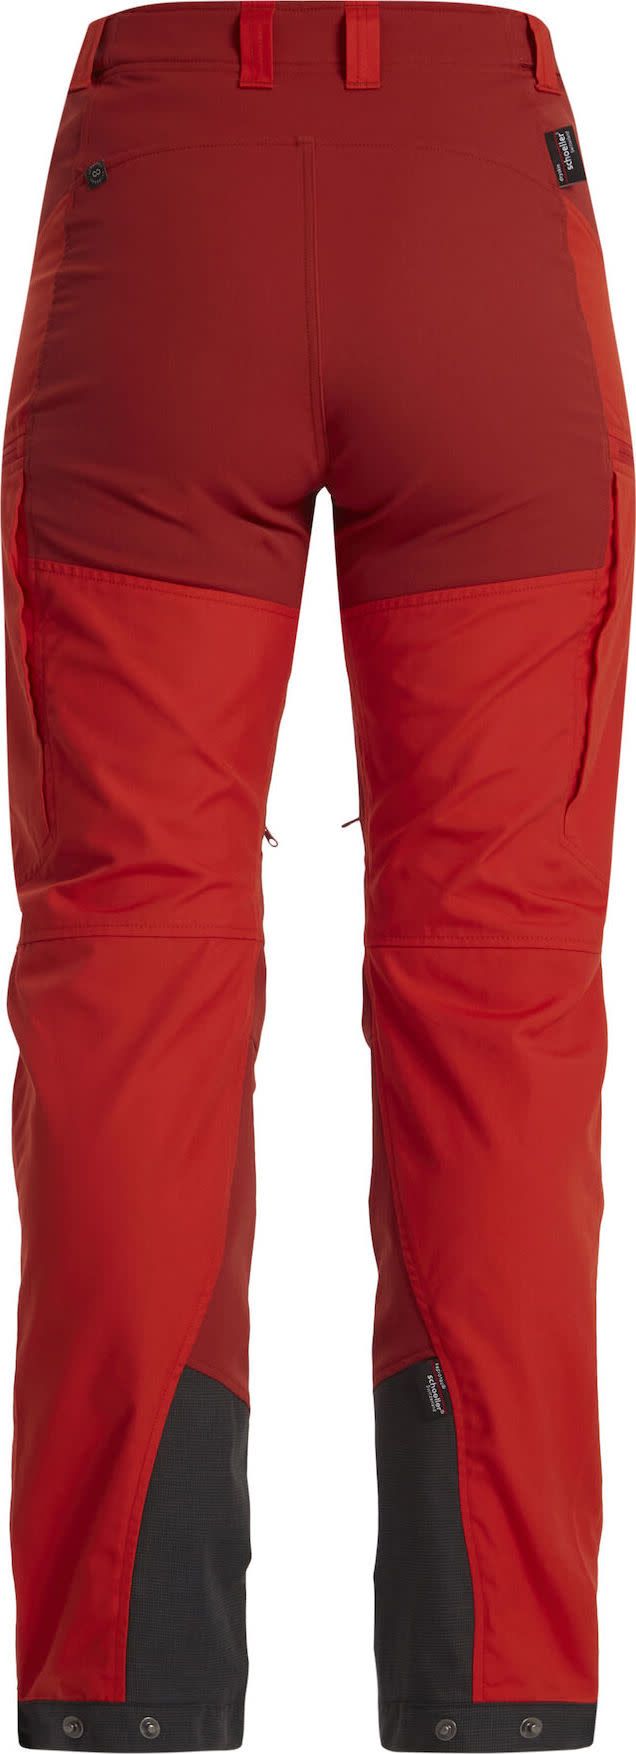 Lundhags Women's Makke High Waist Curved Pant Lively Red/Mellow Red Lundhags